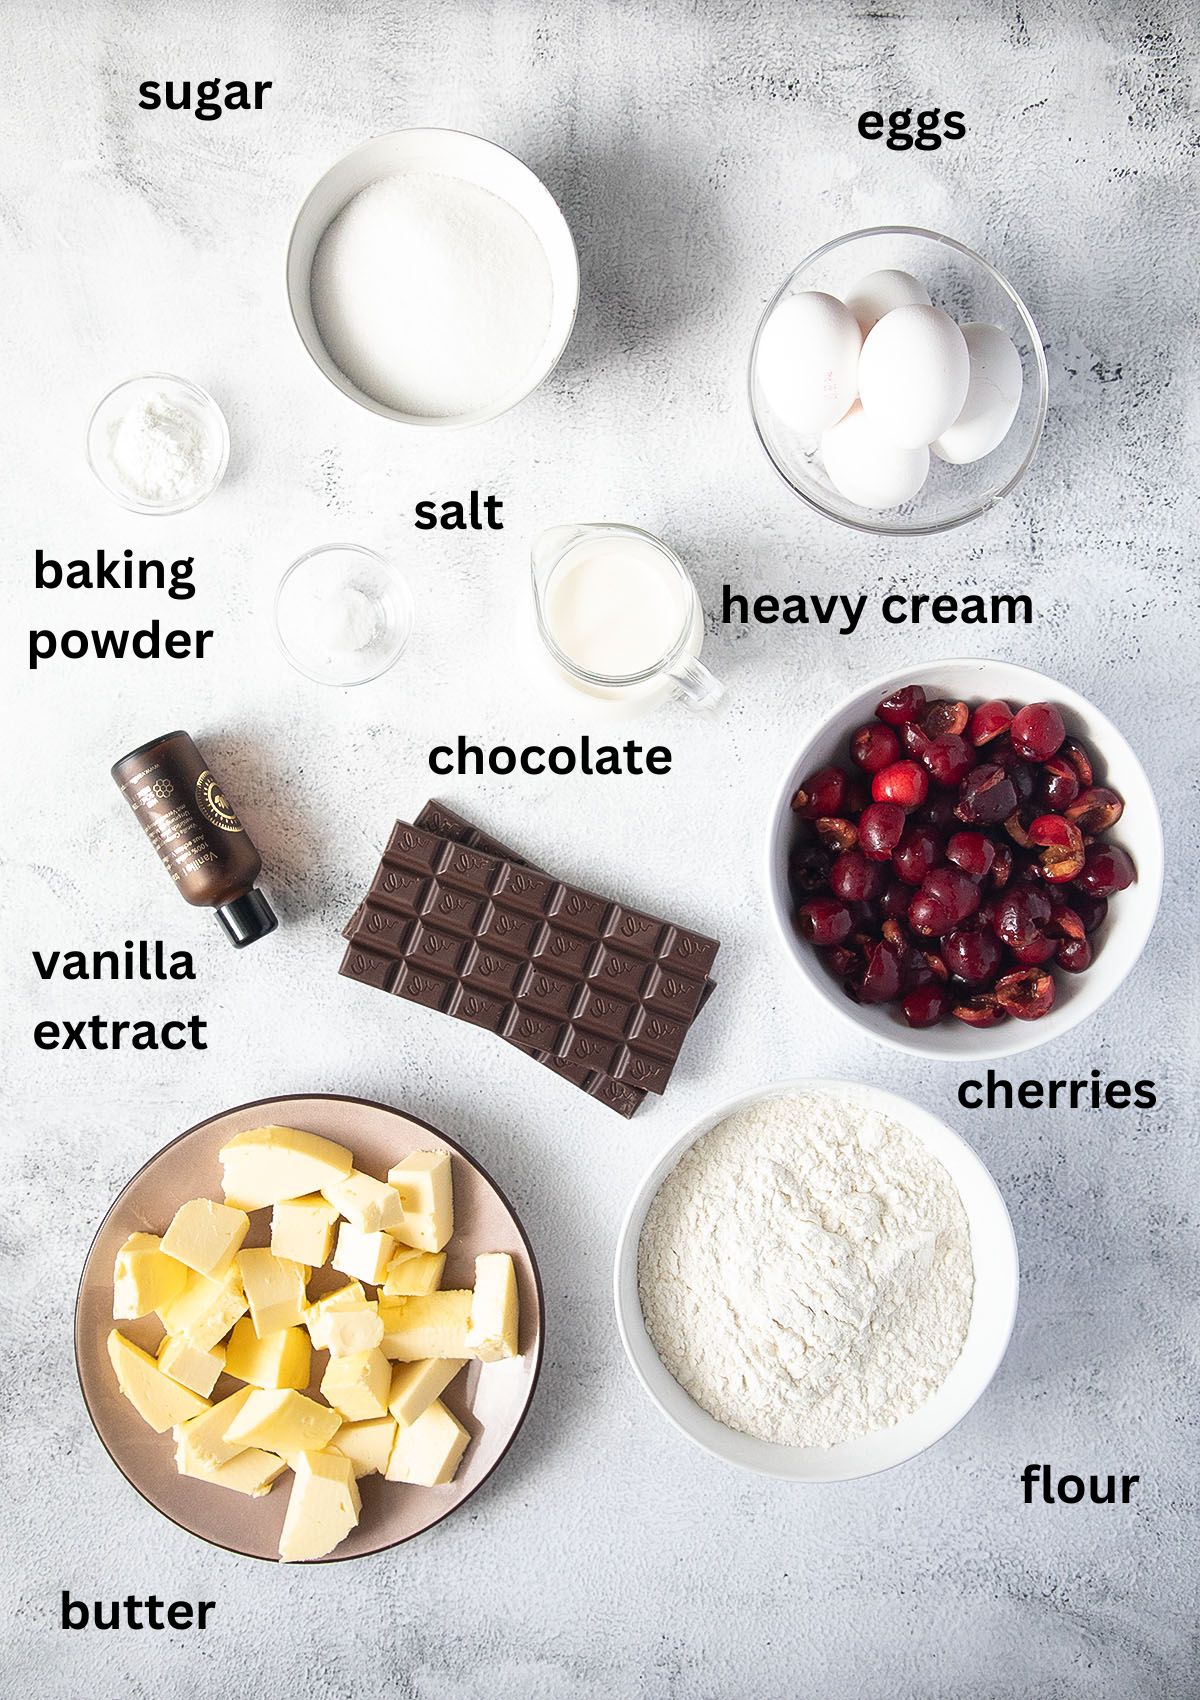 listed ingredients for making bundt cake with cherries and chocolate.